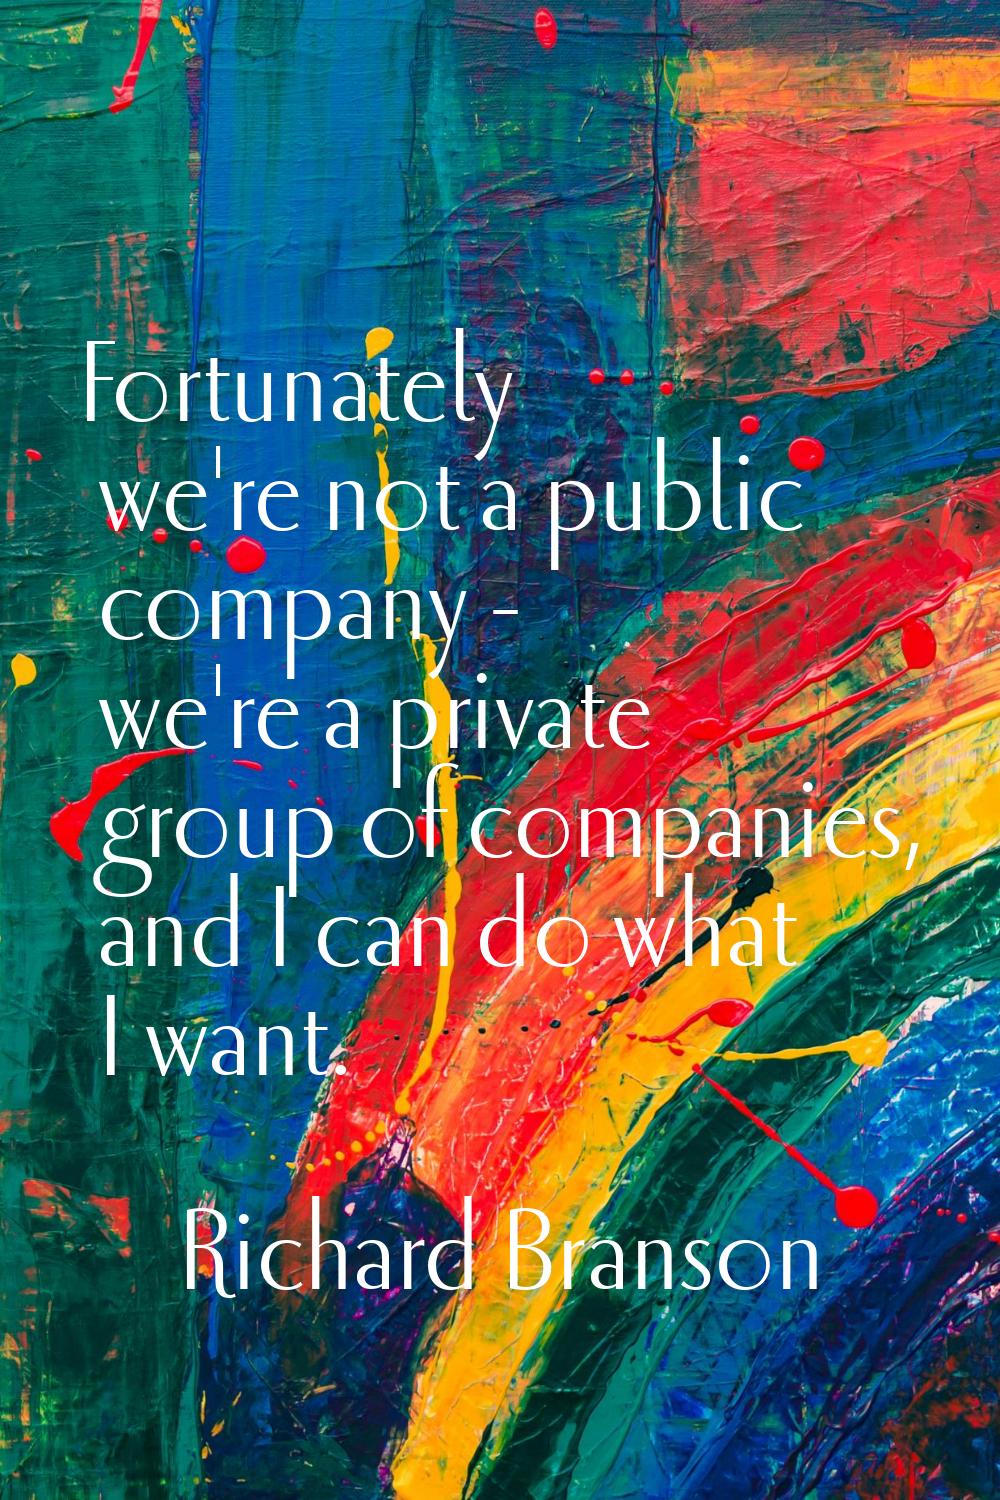 Fortunately we're not a public company - we're a private group of companies, and I can do what I wa